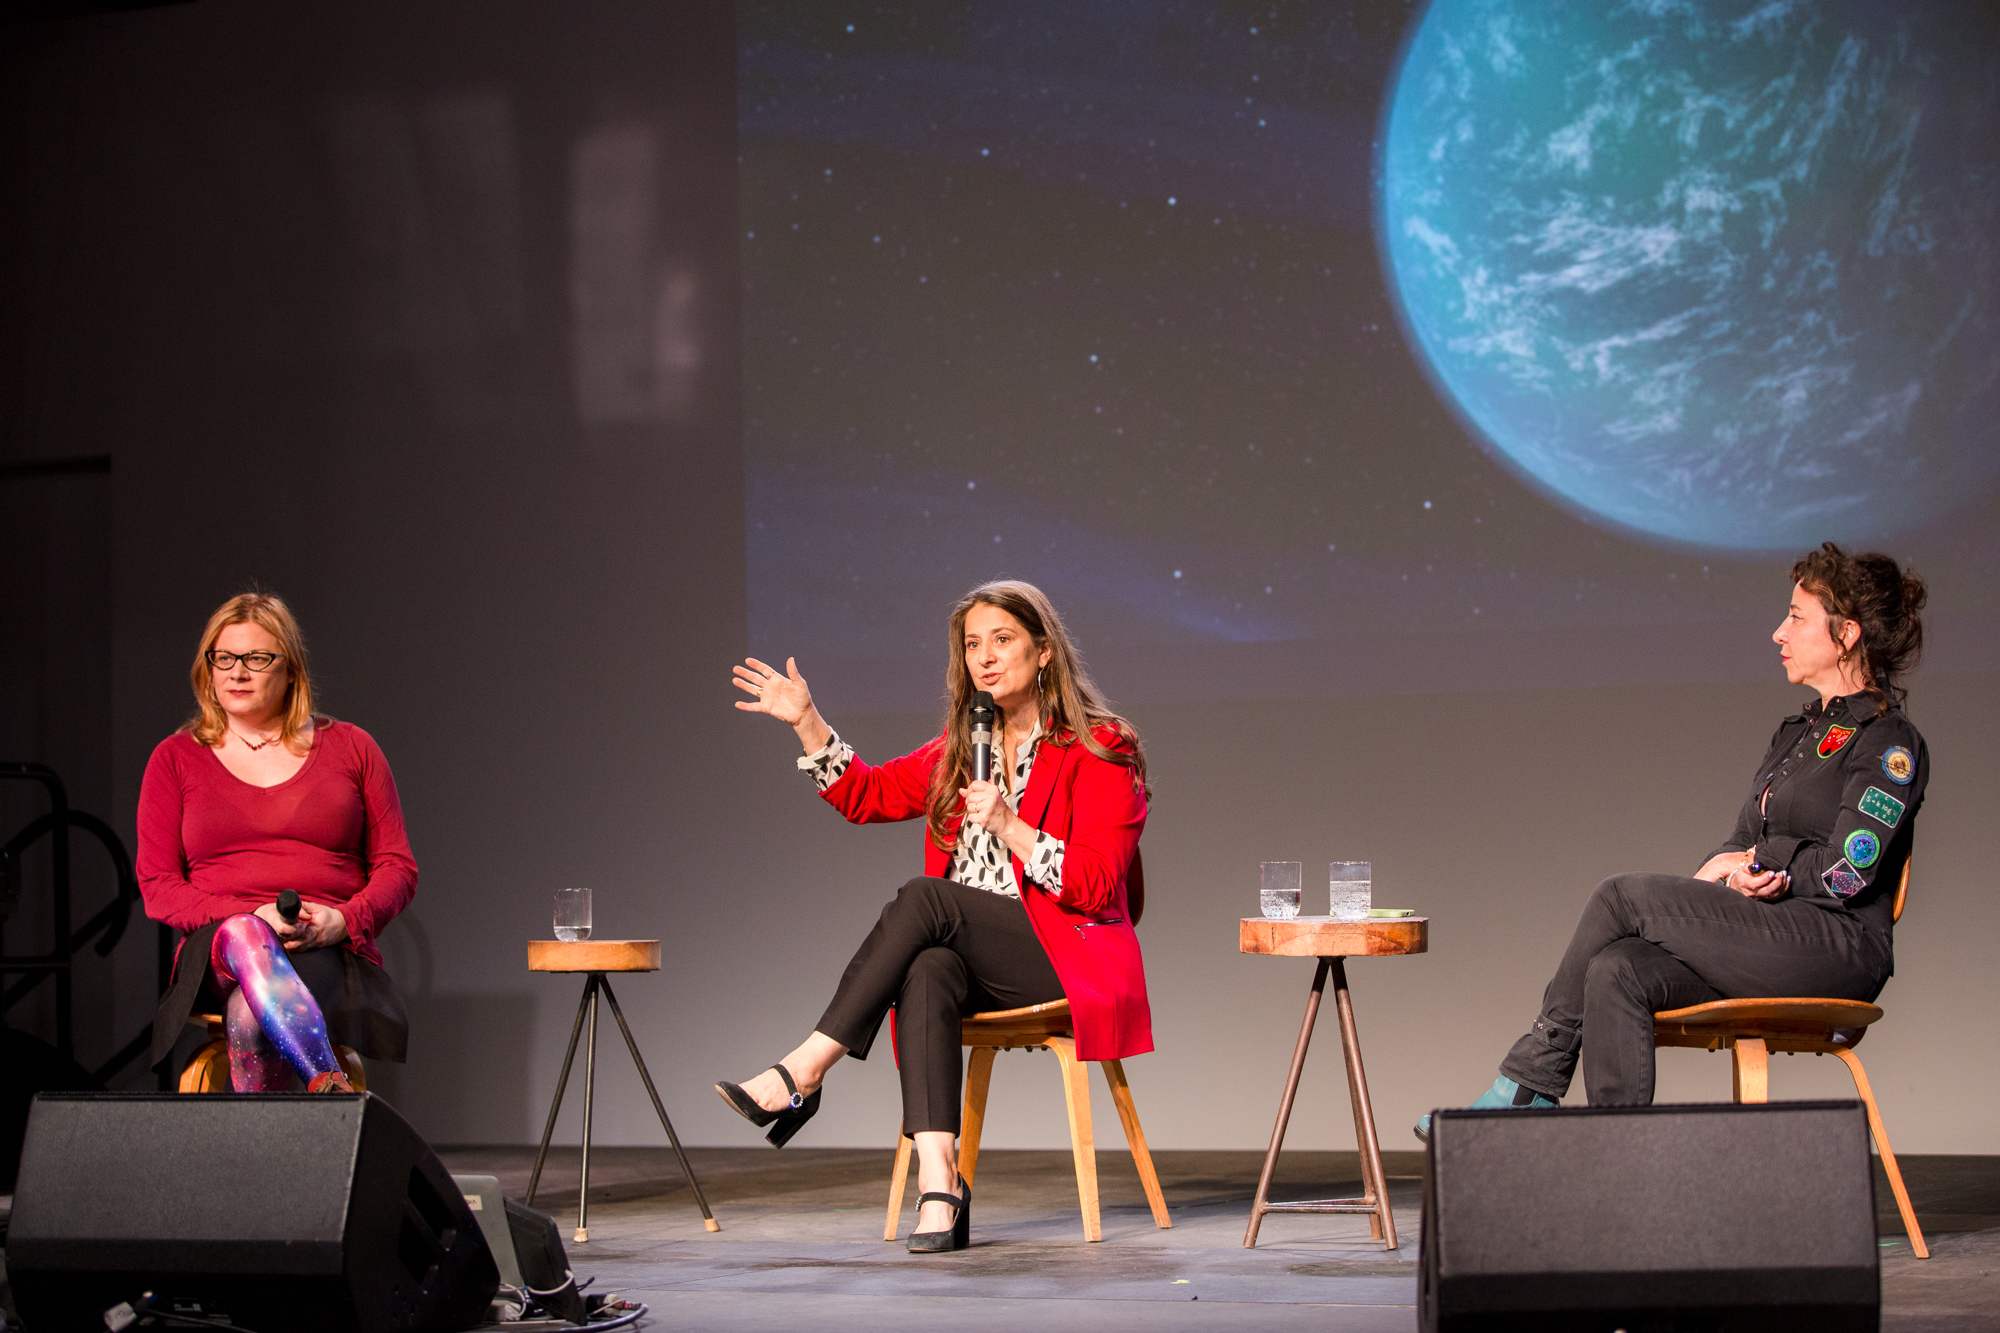 Three scientists sit against the backdrop of a blue planet at a panel discussion. The scientist in the center, Natalie Batalha, speaks into a microphone.